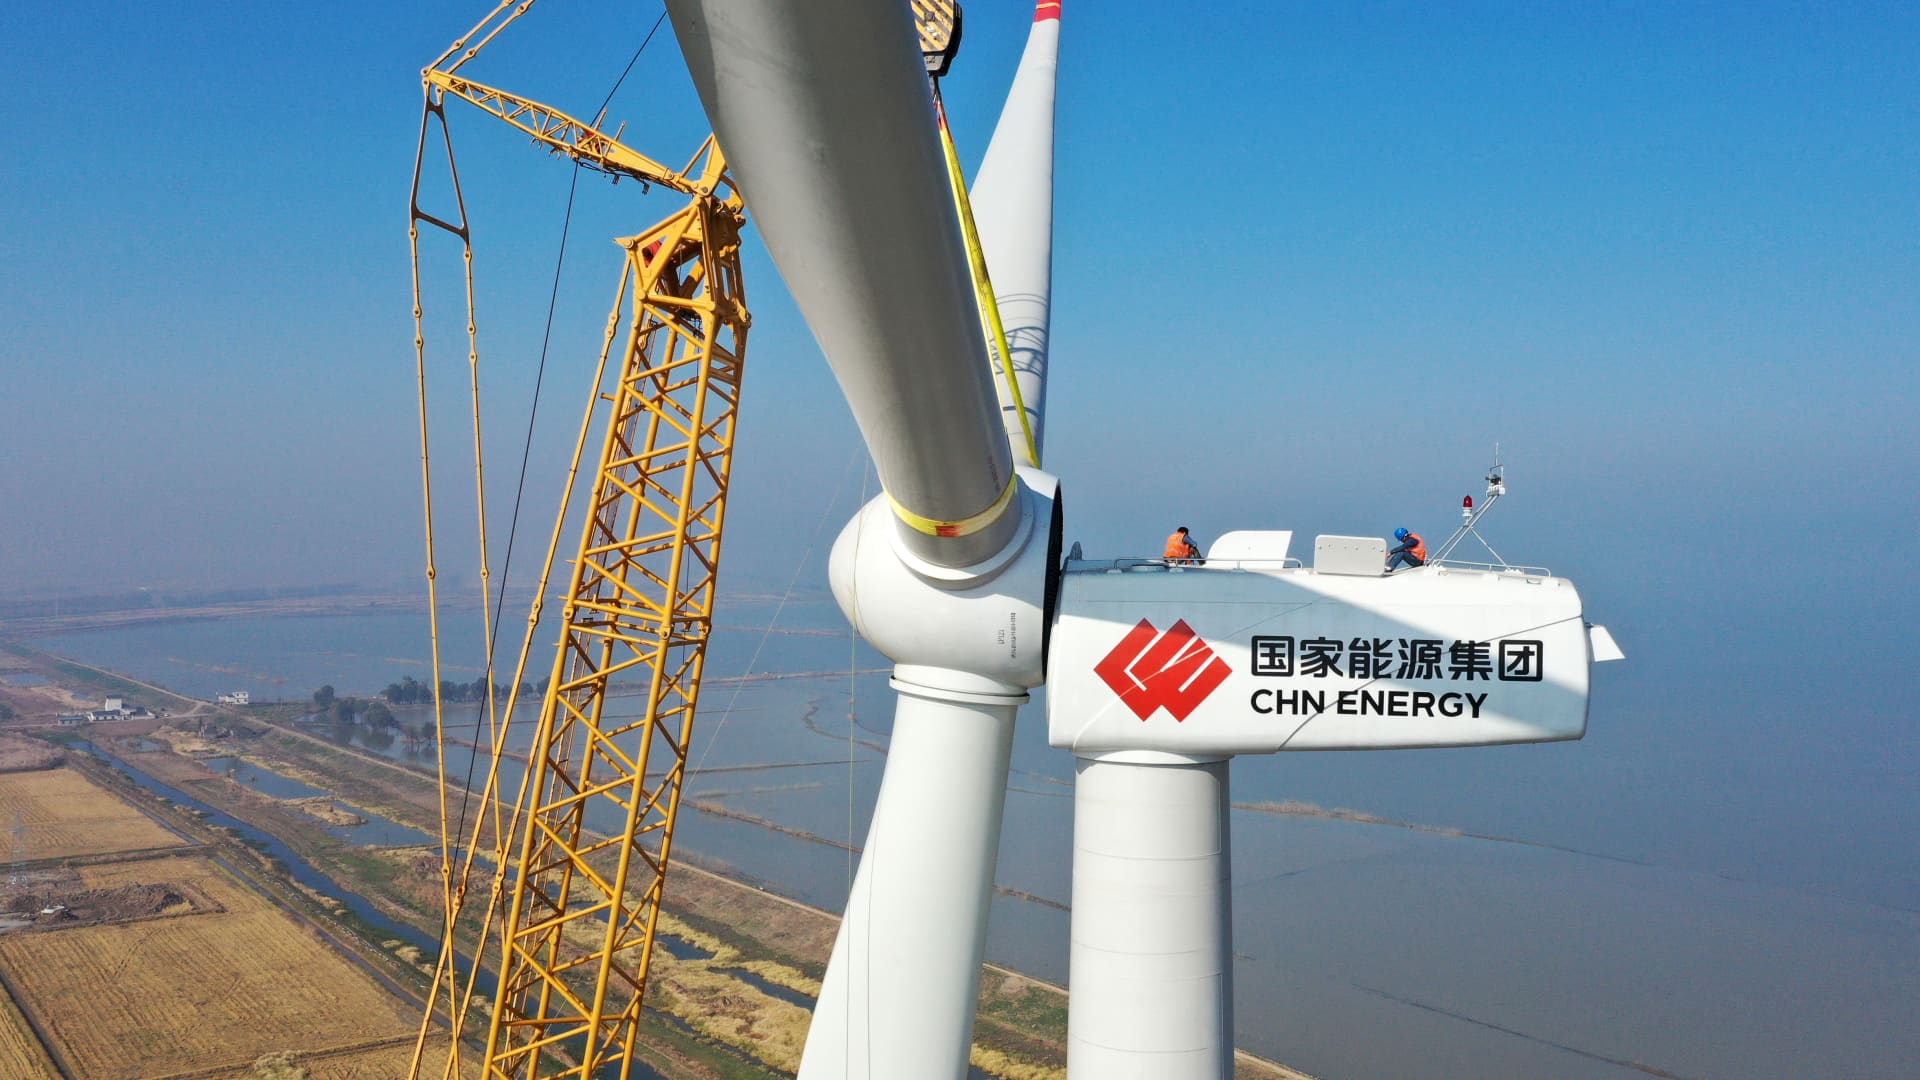 Workers install wind turbines at a wind farm on November 16, 2020 in Anqing, Anhui Province of China.